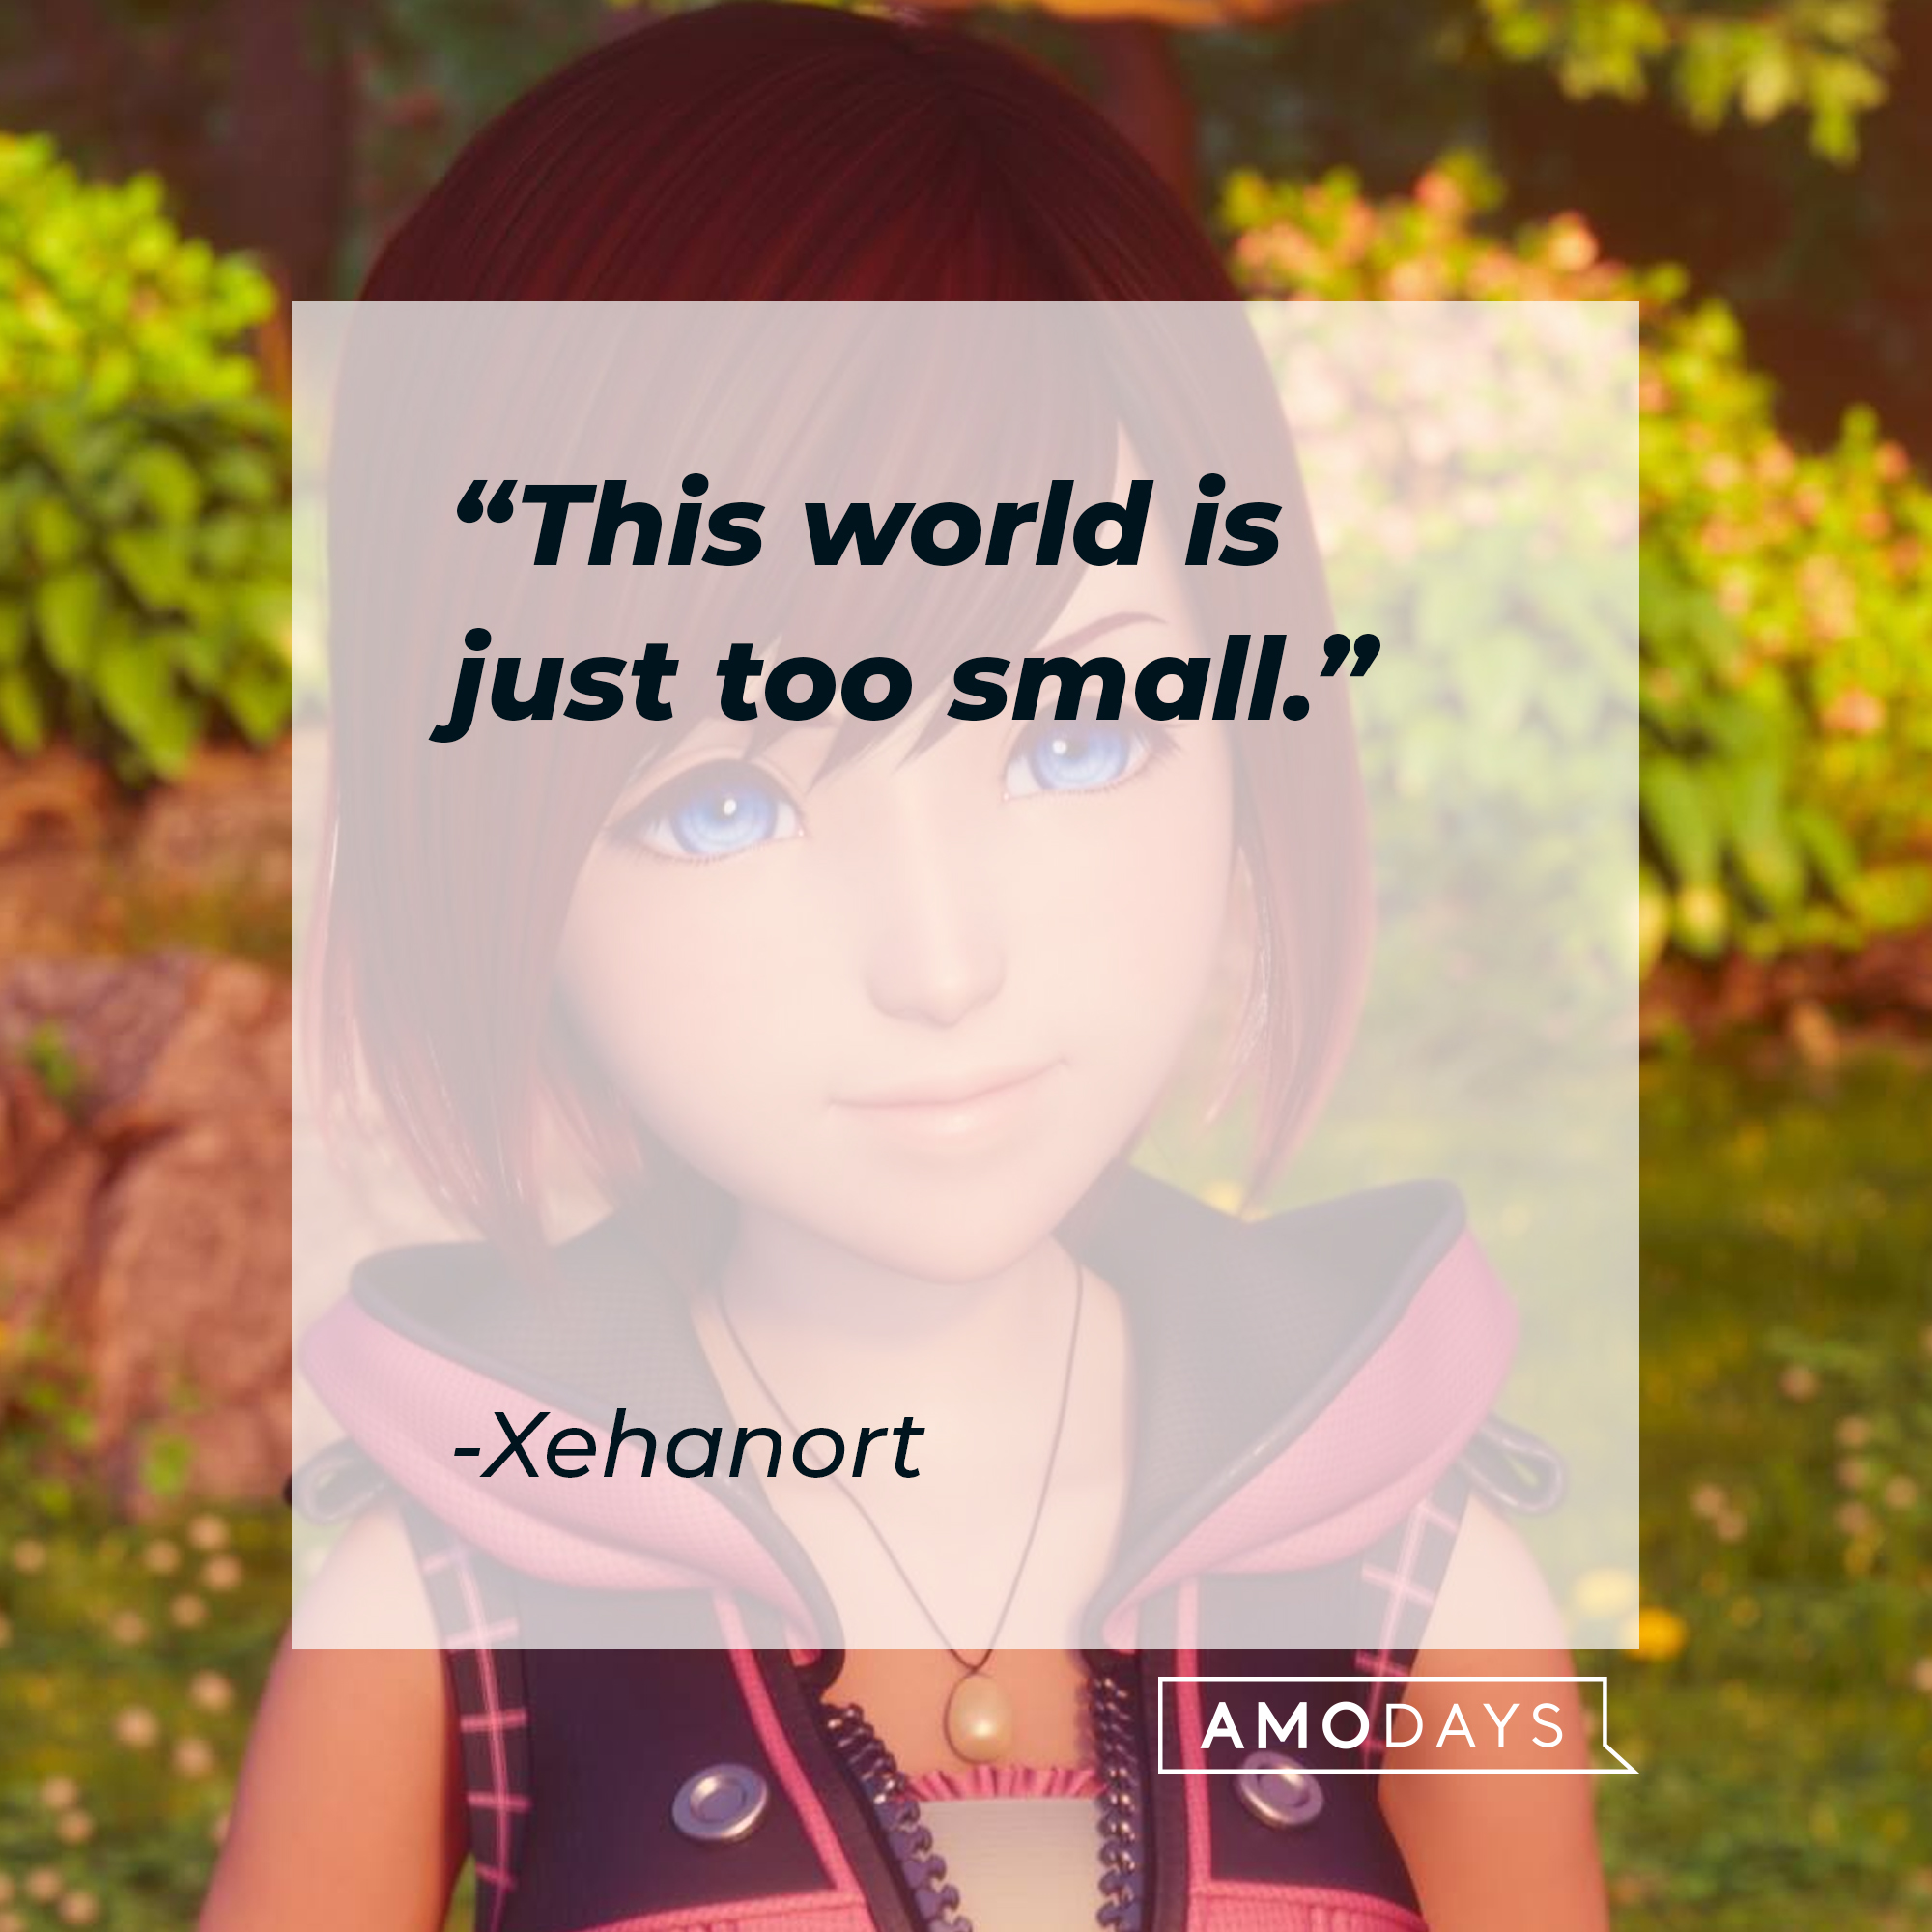 An image of Kairi with Xehanort’s quote: "This world is just too small." | Source: facebook.com/KingdomHearts